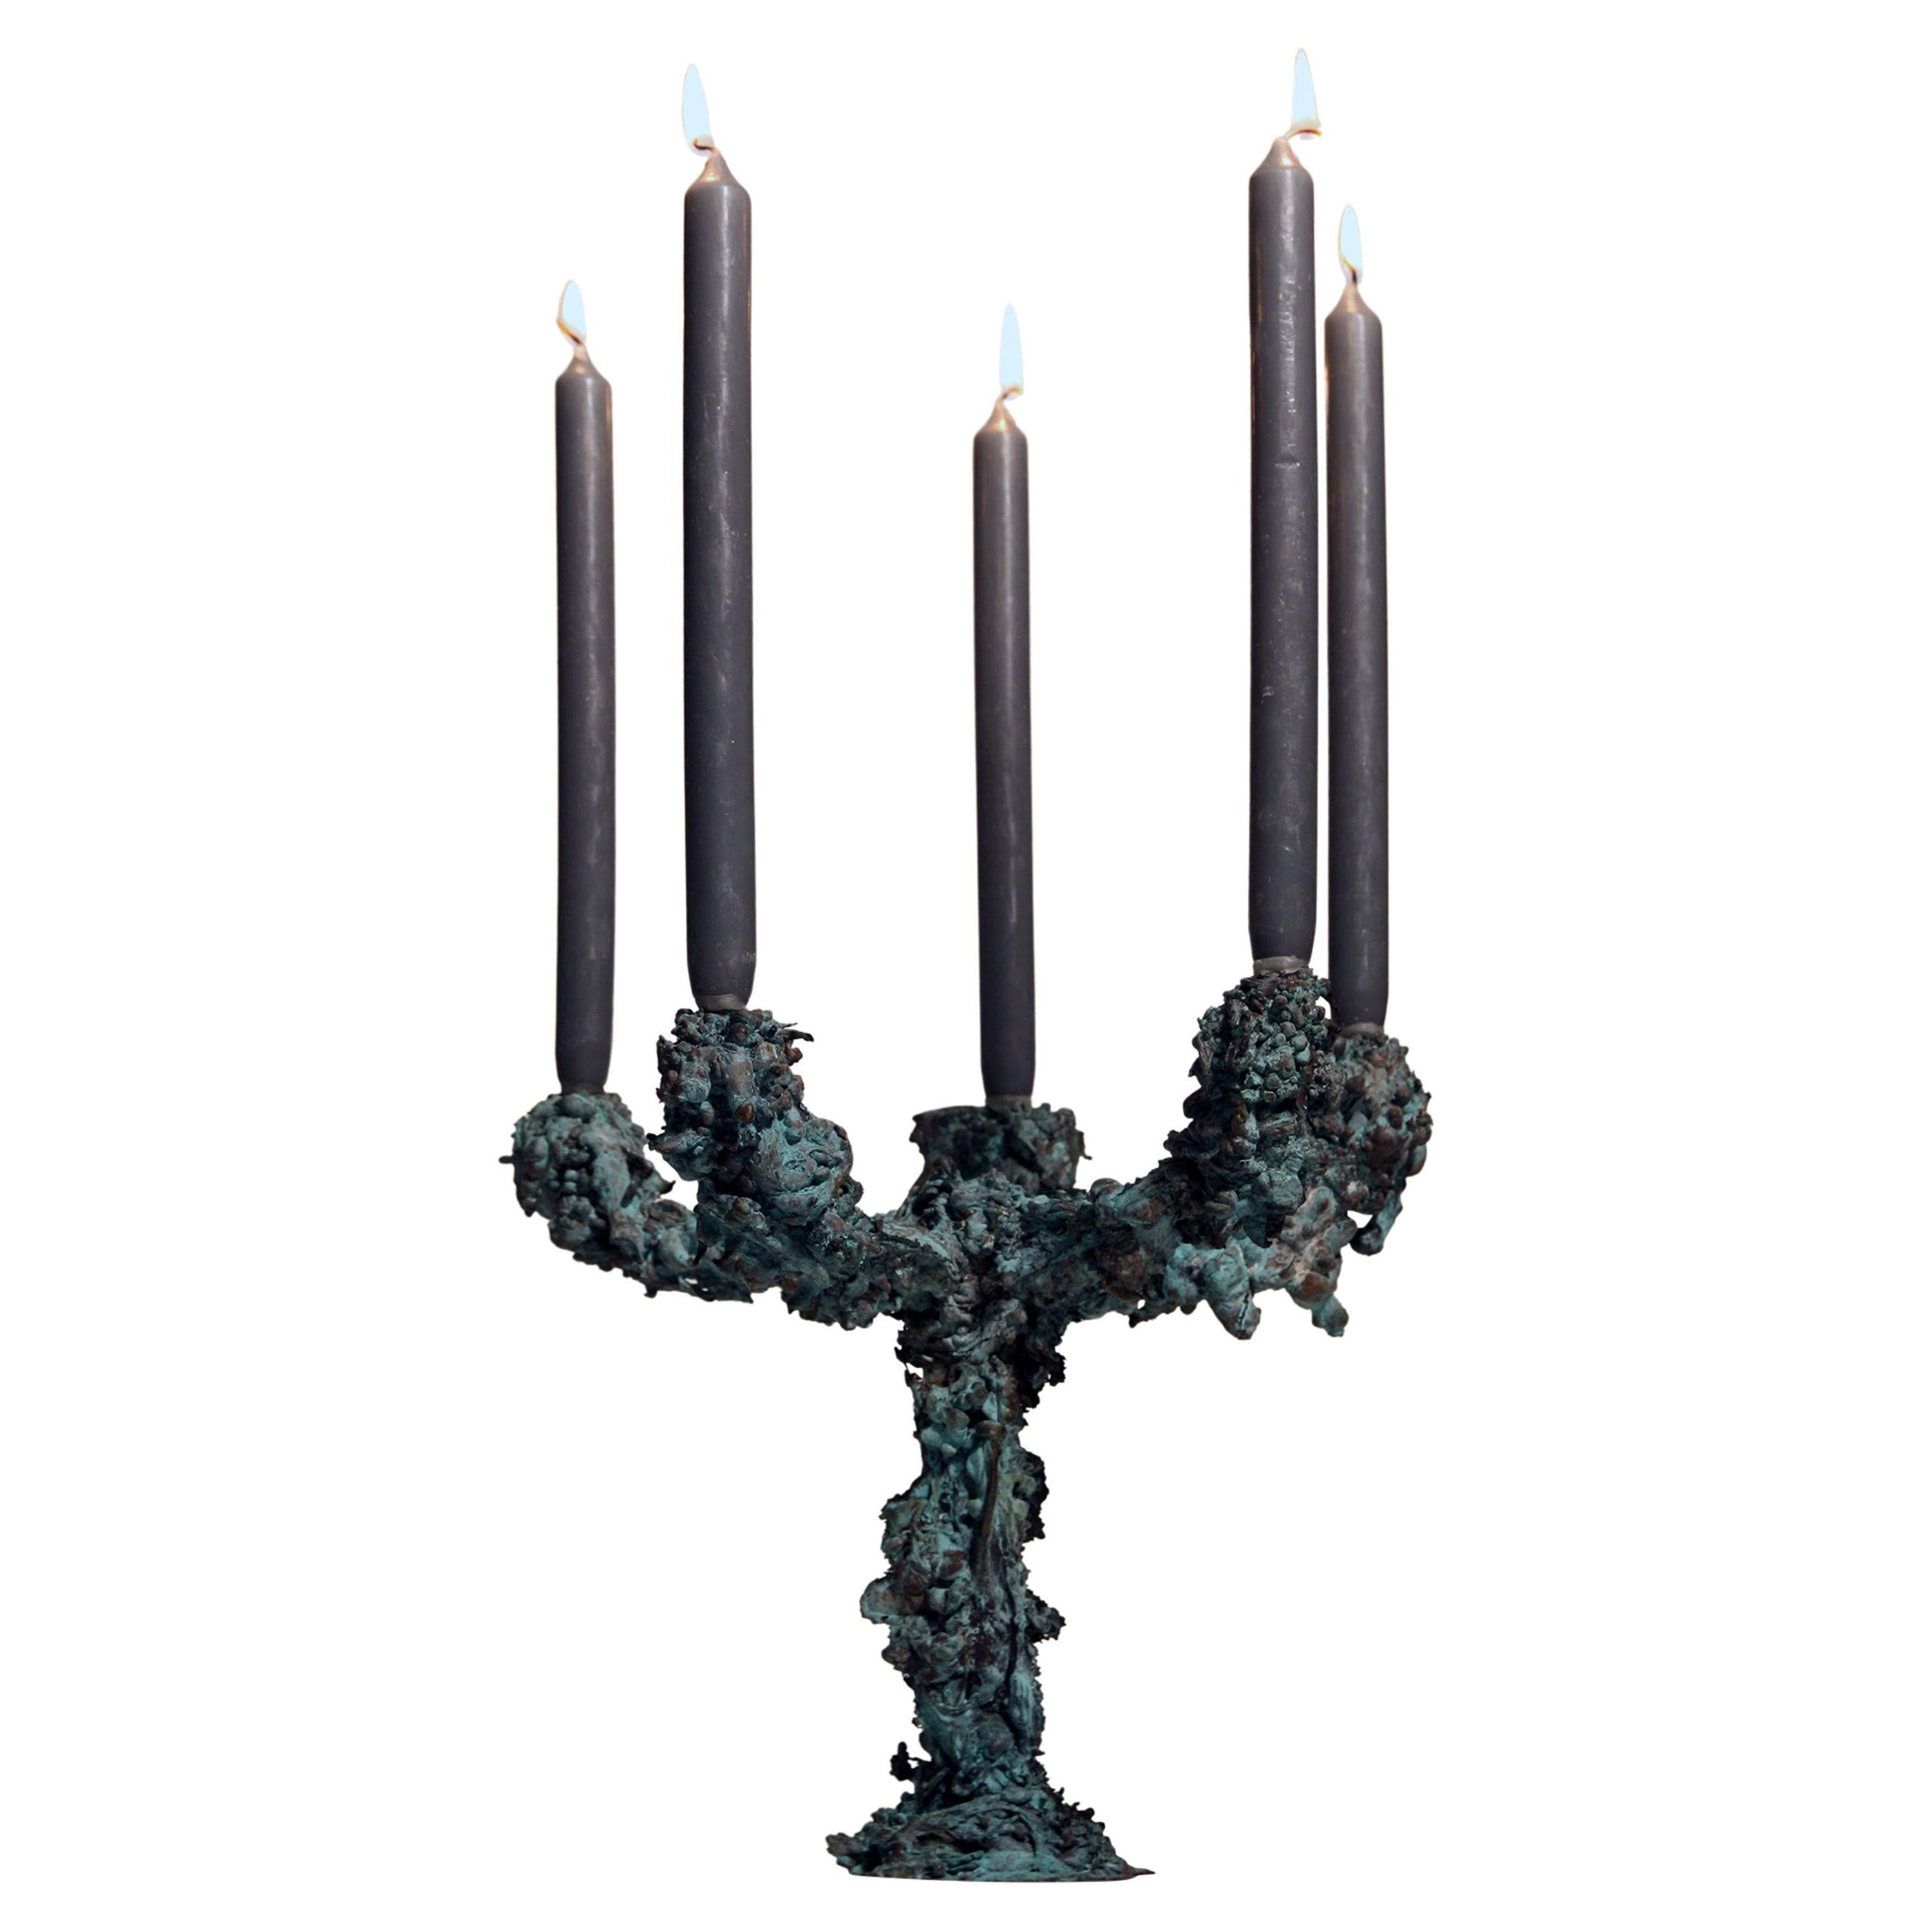 Pascal Smelik, the Upside Down, 5-Armed Candelabra, 'Collectible Design'